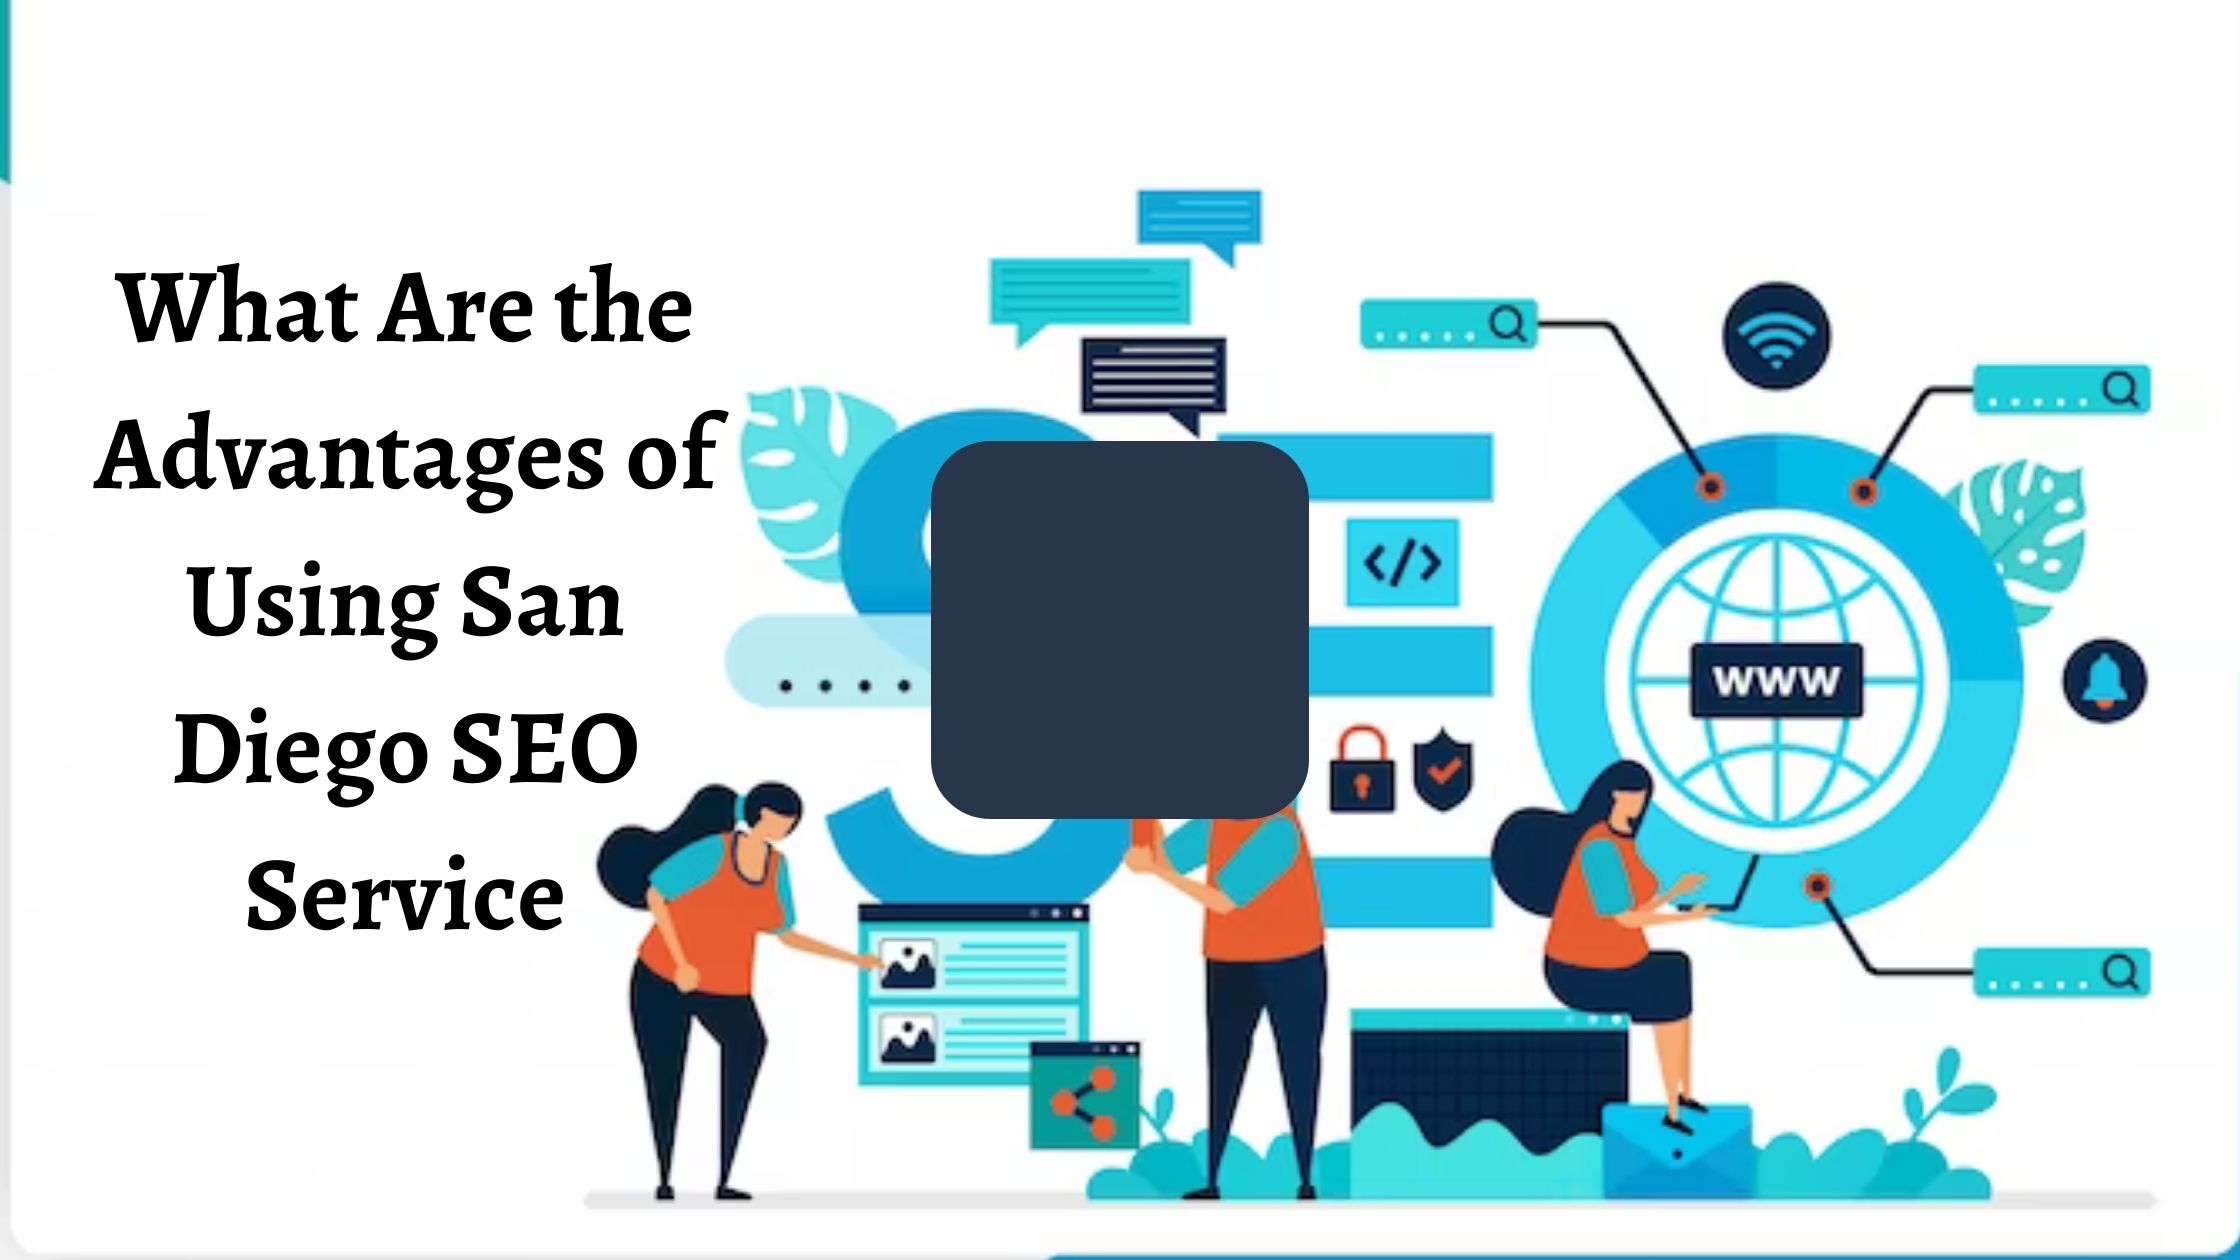 What Are the Advantages of Using San Diego SEO Service?